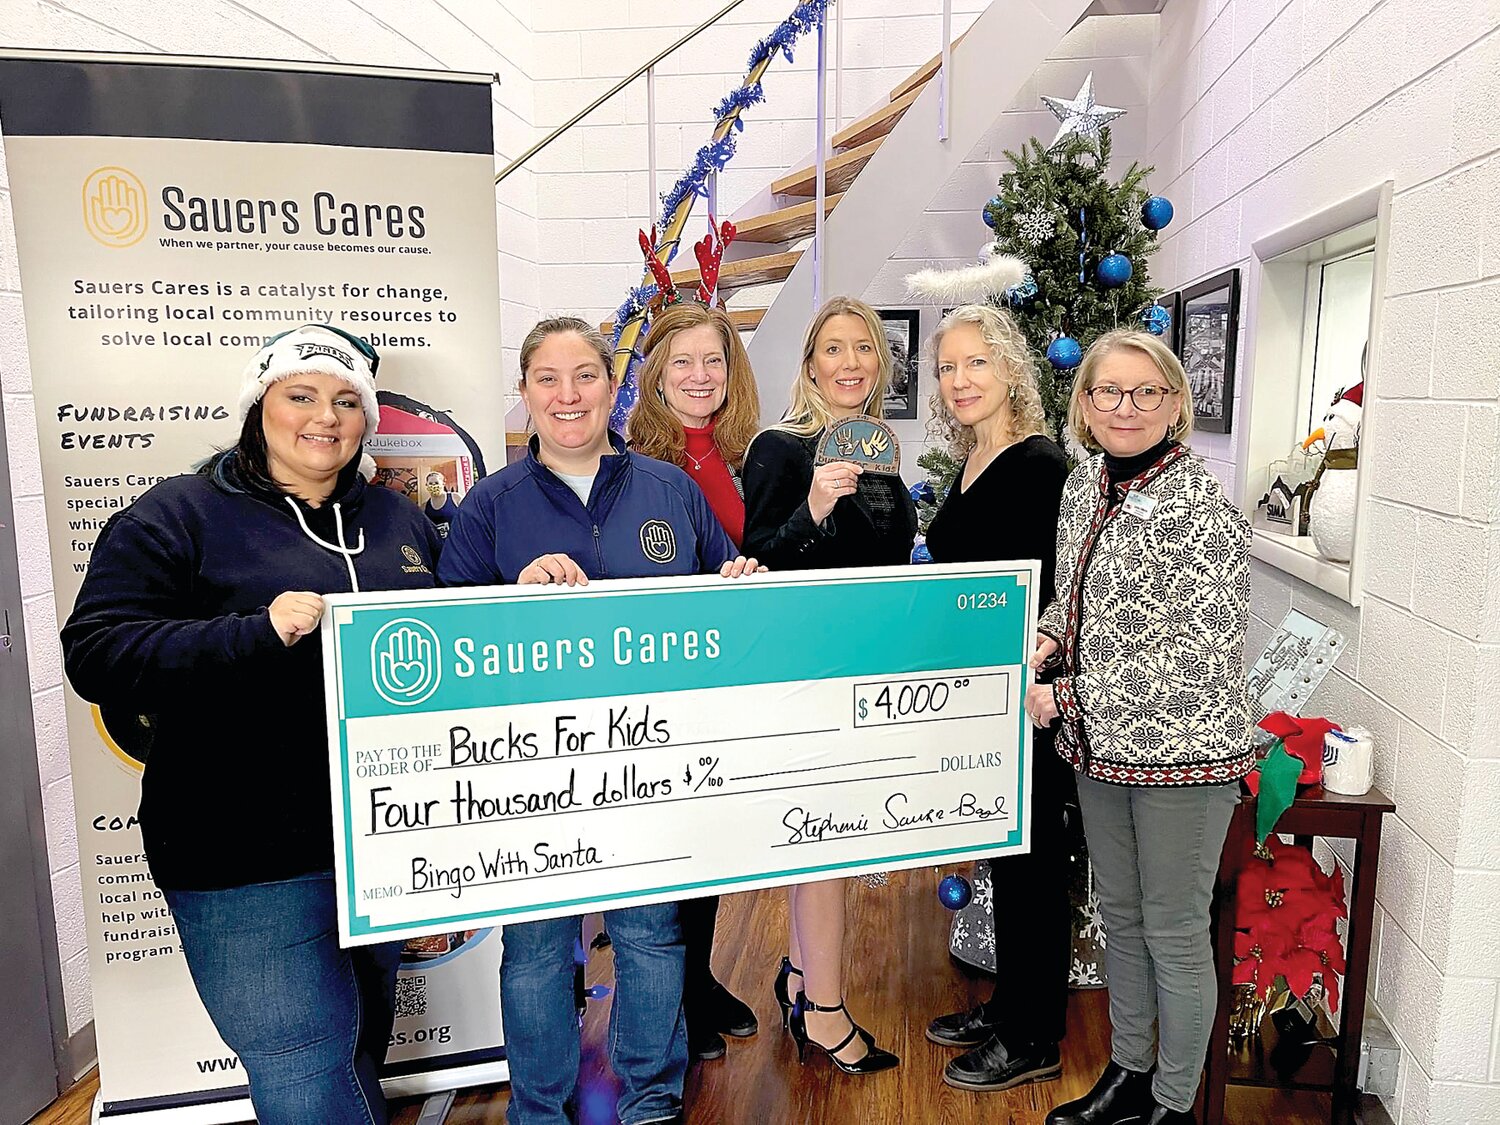 From left, Stephanie Sauers Boyd and Danielle Fox, both of Sauers Cares, stand with Bucks for Kids’ Nancy Larkin Taylor, Dawn Padanyi, Lodina Slawecki and Linda DeMario.